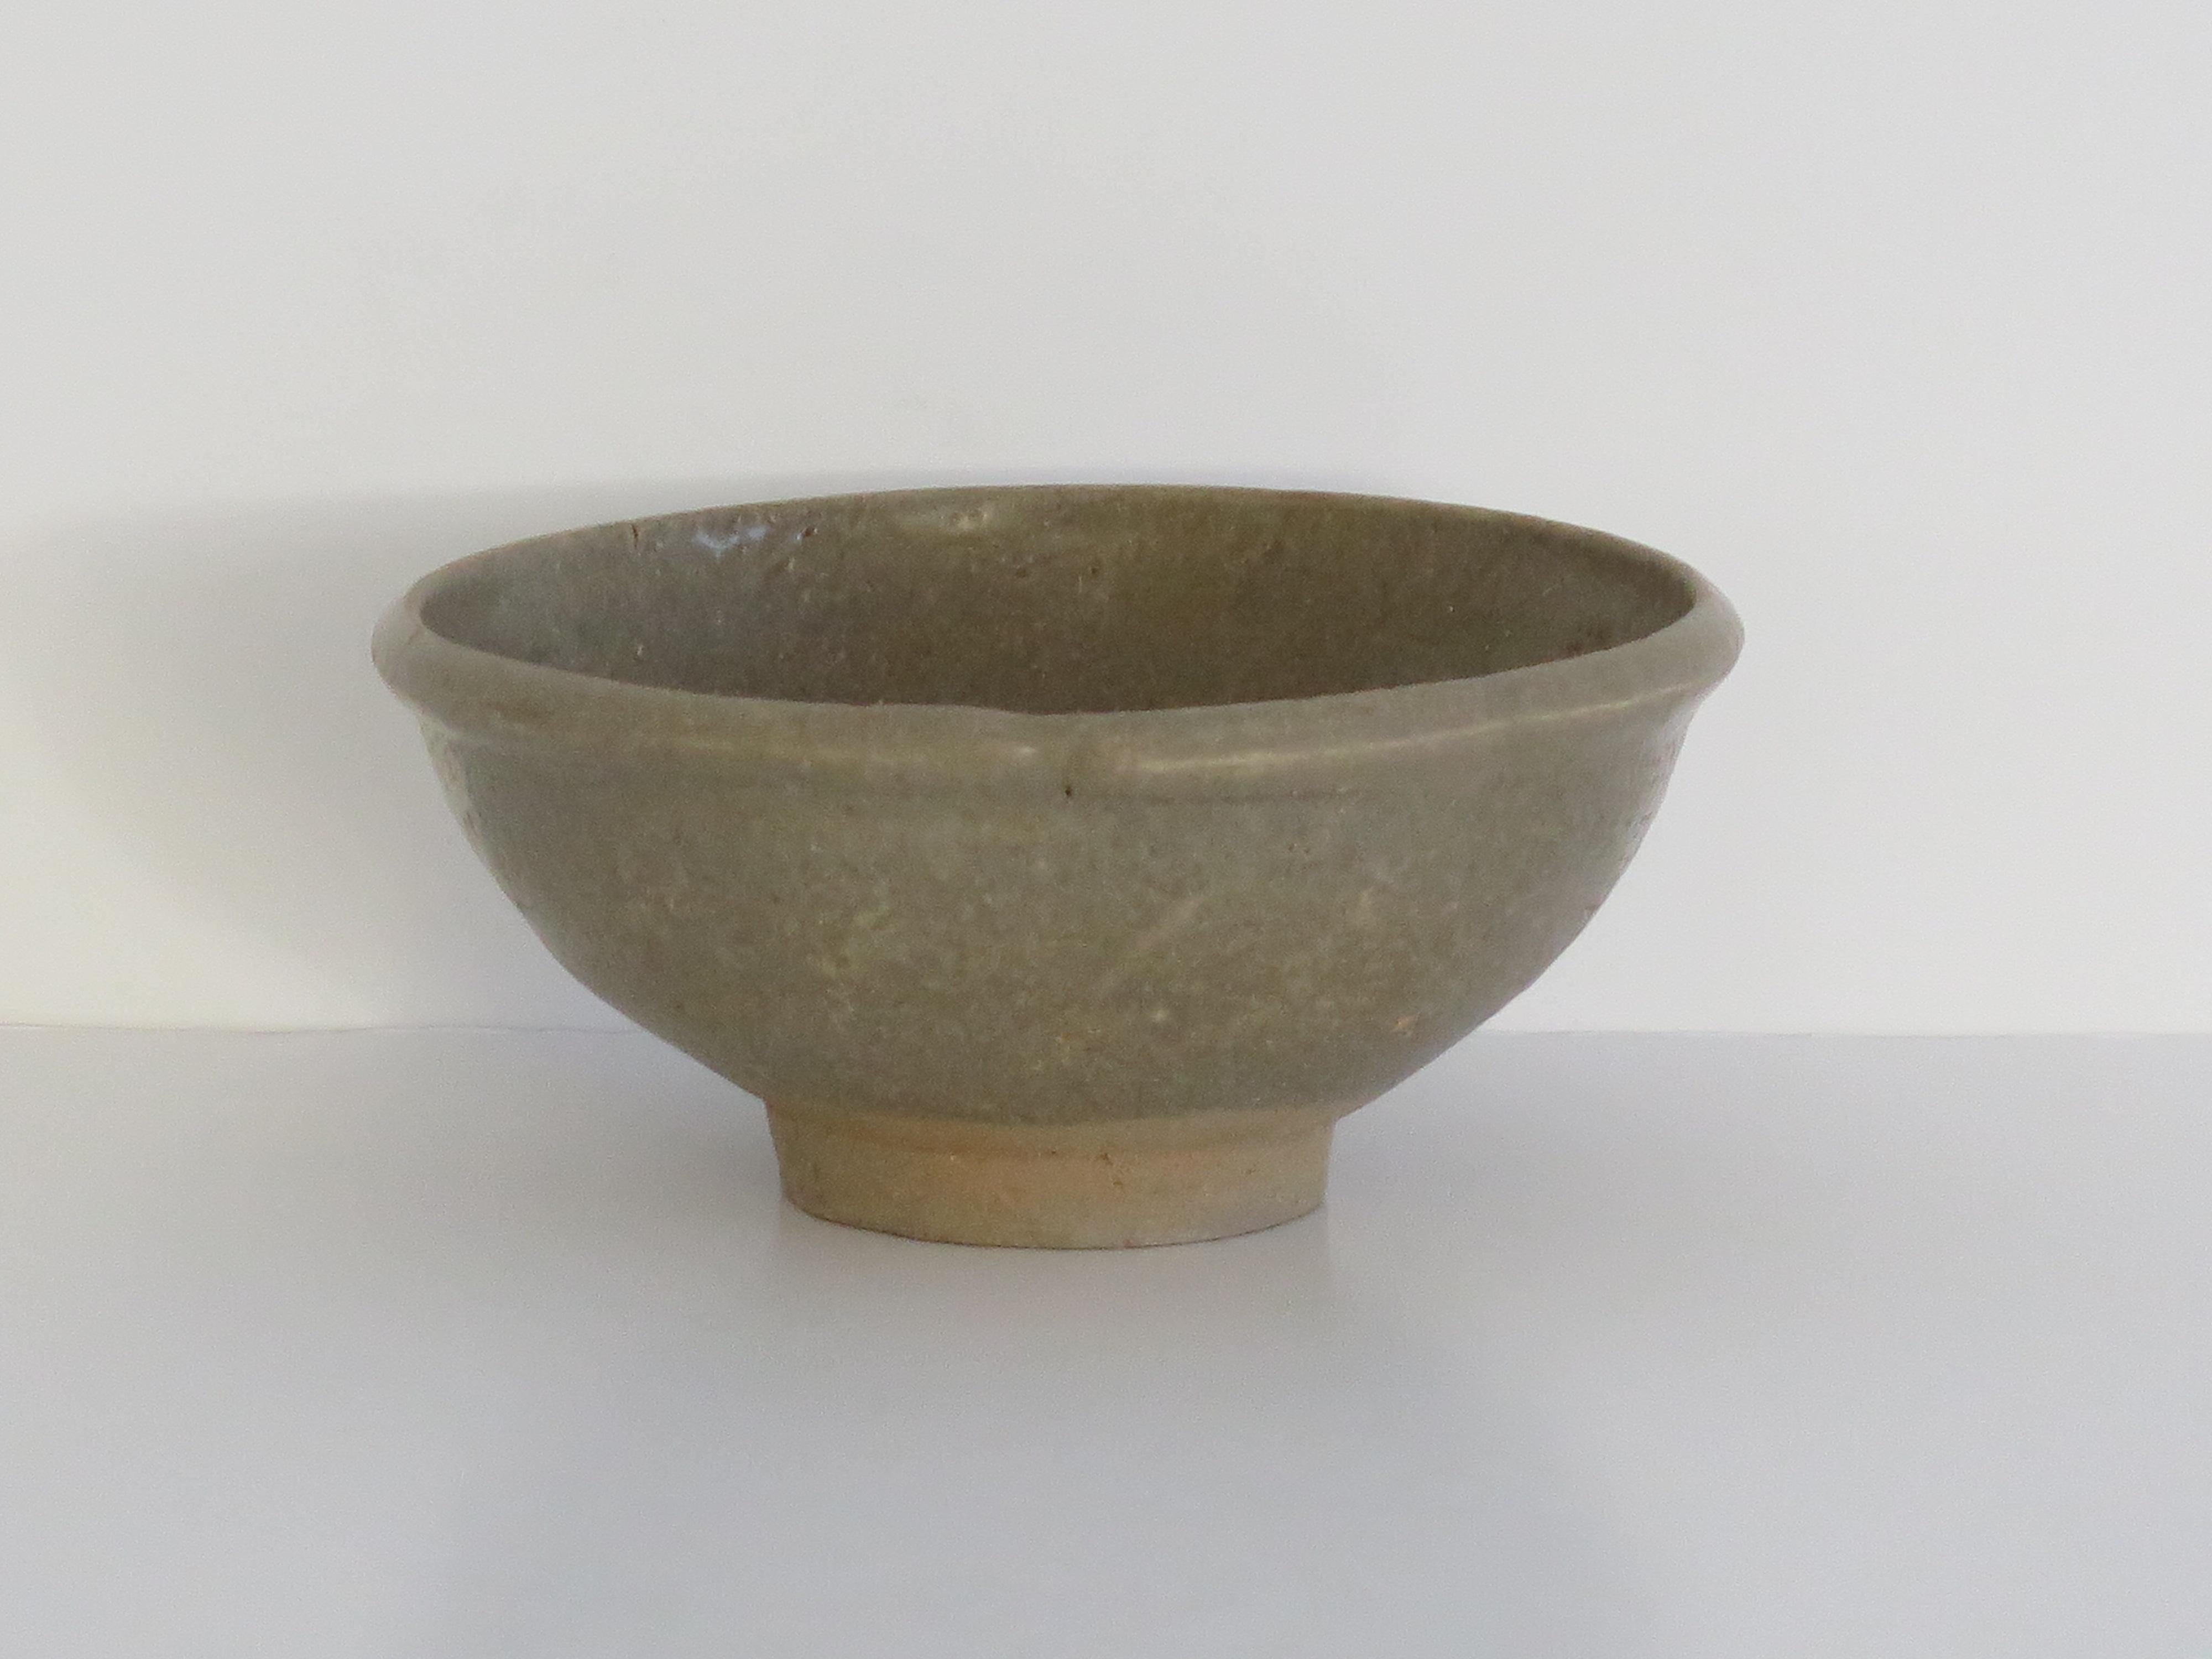 This is a very old interesting Chinese Export stoneware Longquan Celadon bowl, which we date to the early Ming or later Yuan Dynasty, circa 1400 or earlier.

The bowl is well potted with a fairly thick rim and on a high foot. The glaze thickness